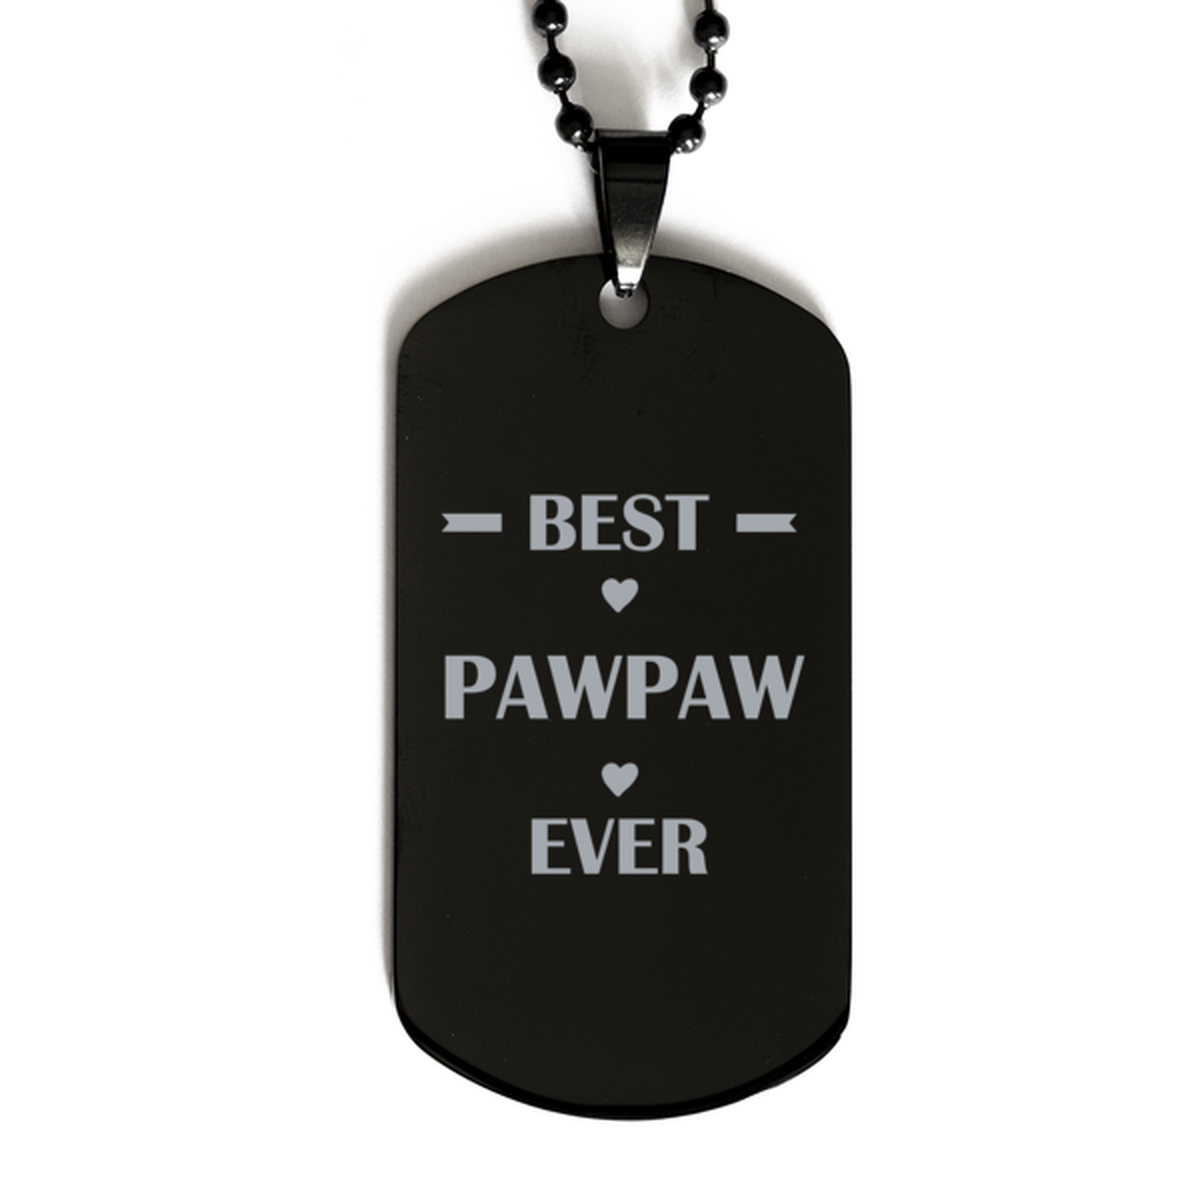 Best Pawpaw Ever Pawpaw Gifts, Funny Black Dog Tag For Pawpaw, Birthday Family Presents Engraved Necklace For Men